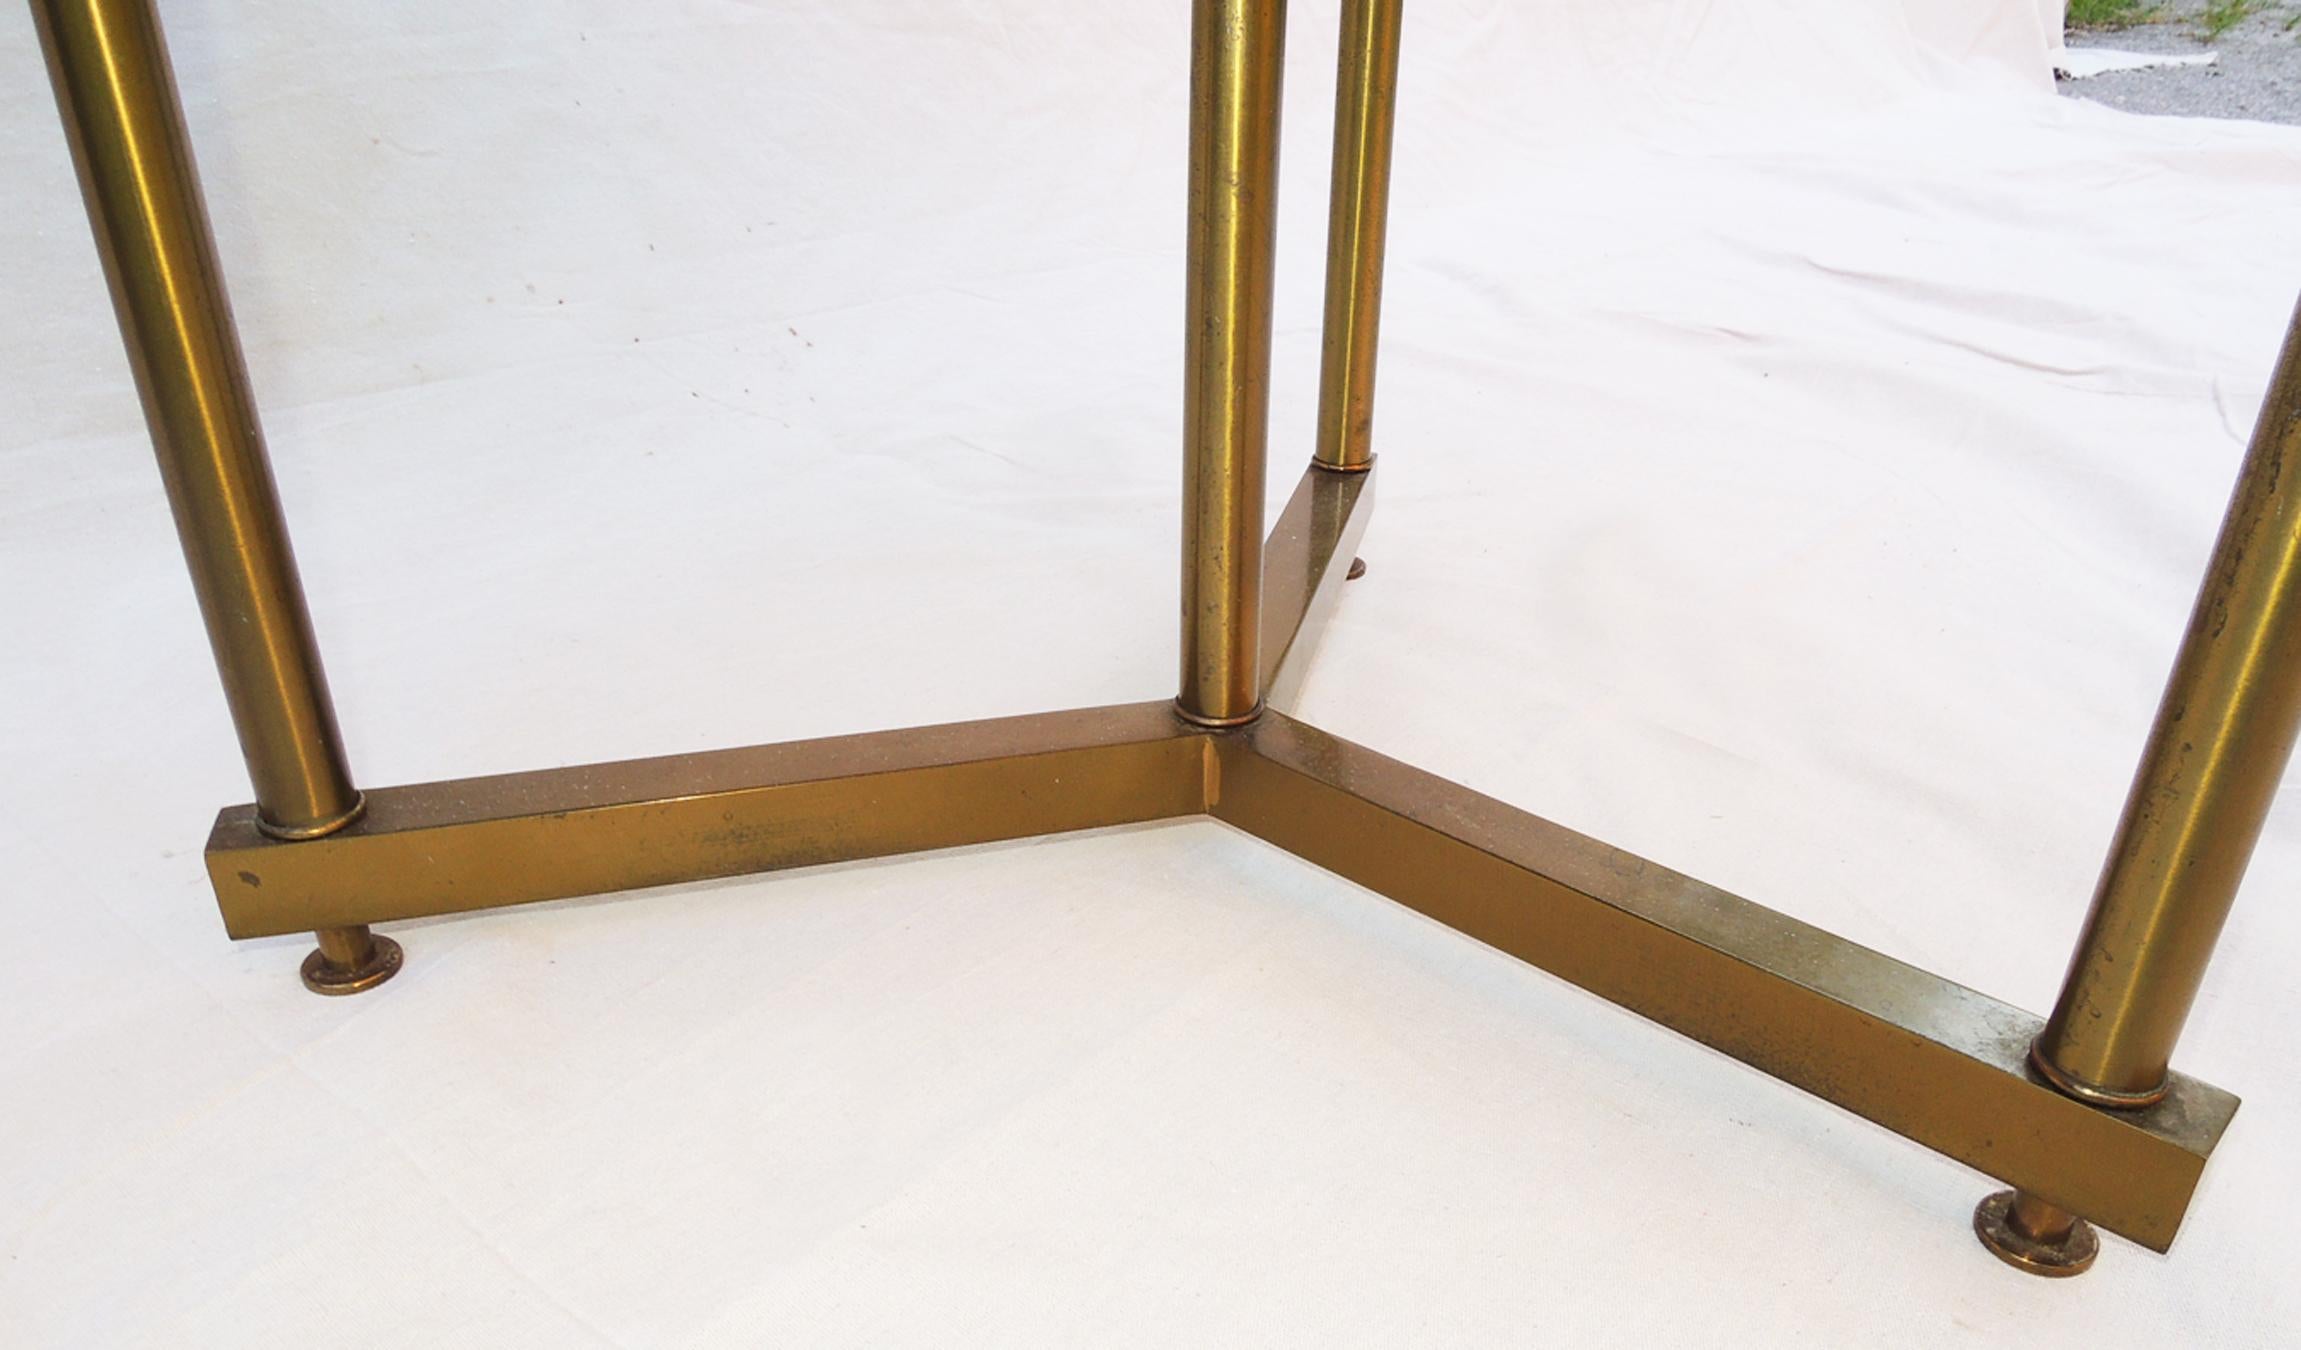 Round gueridon with simple brass legs, flat disc feet floating the Y-frame off the ground.
Italian travertine clean.